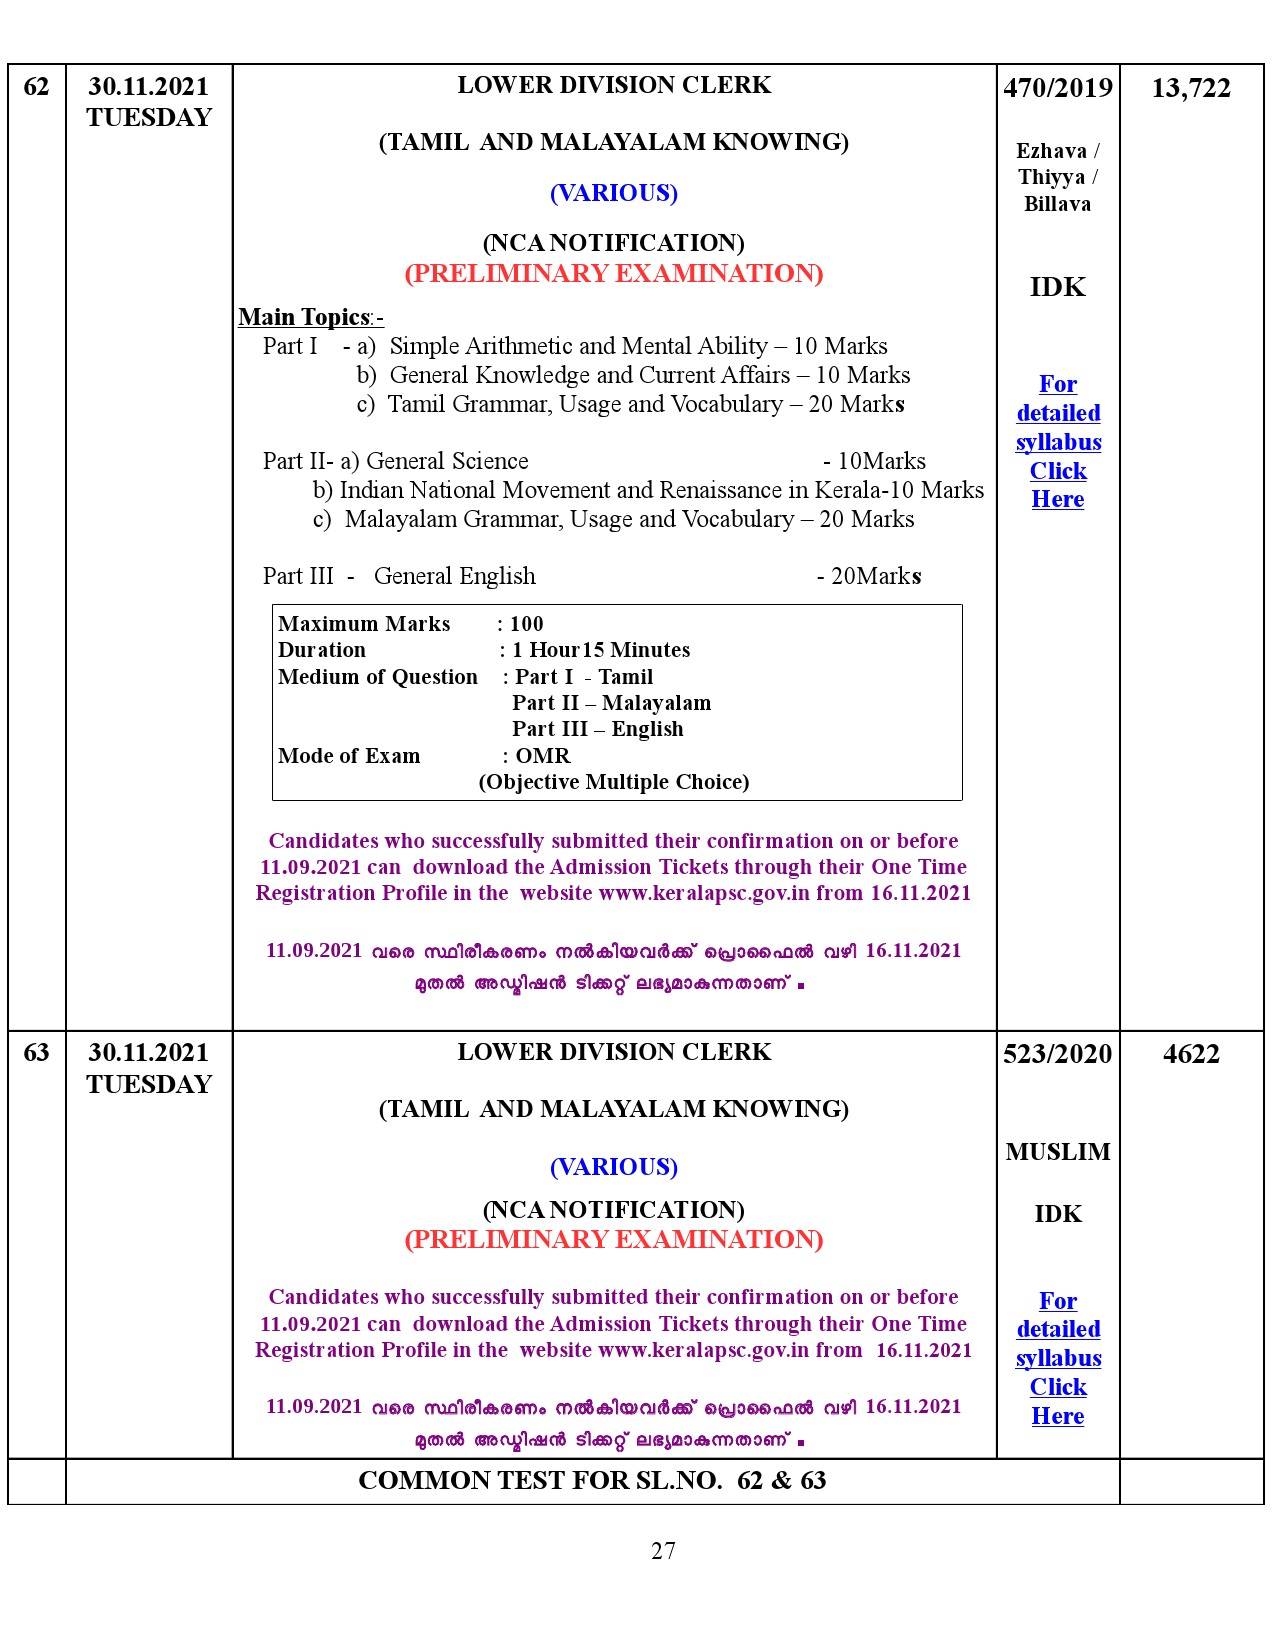 KPSC Examination Programme For The Month Of November 2021 - Notification Image 27